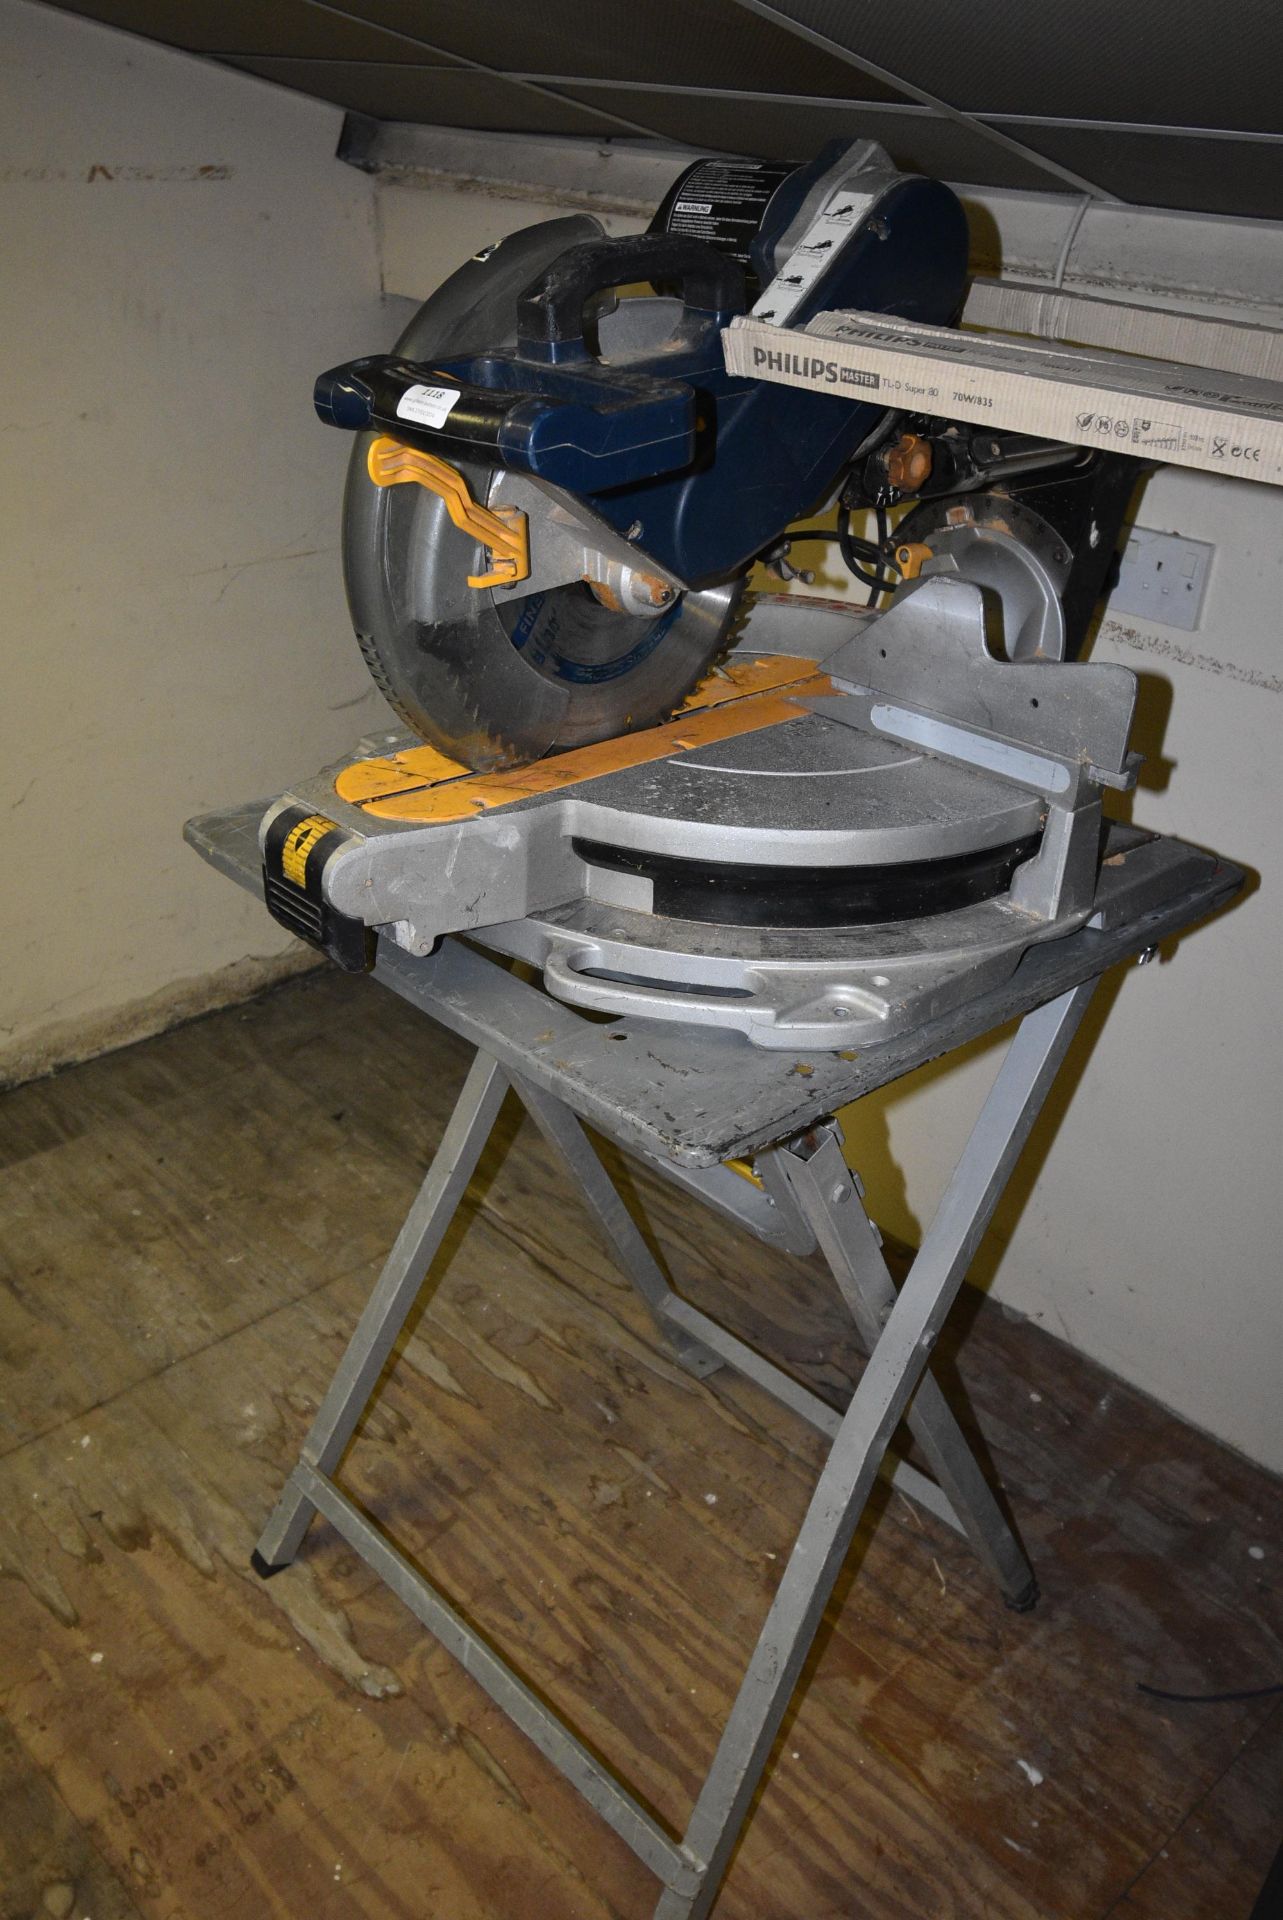 *Ryobi 110v Chop Saw with Stand (Location: 64 King Edward St, Grimsby, DN31 3JP, Viewing Tuesday